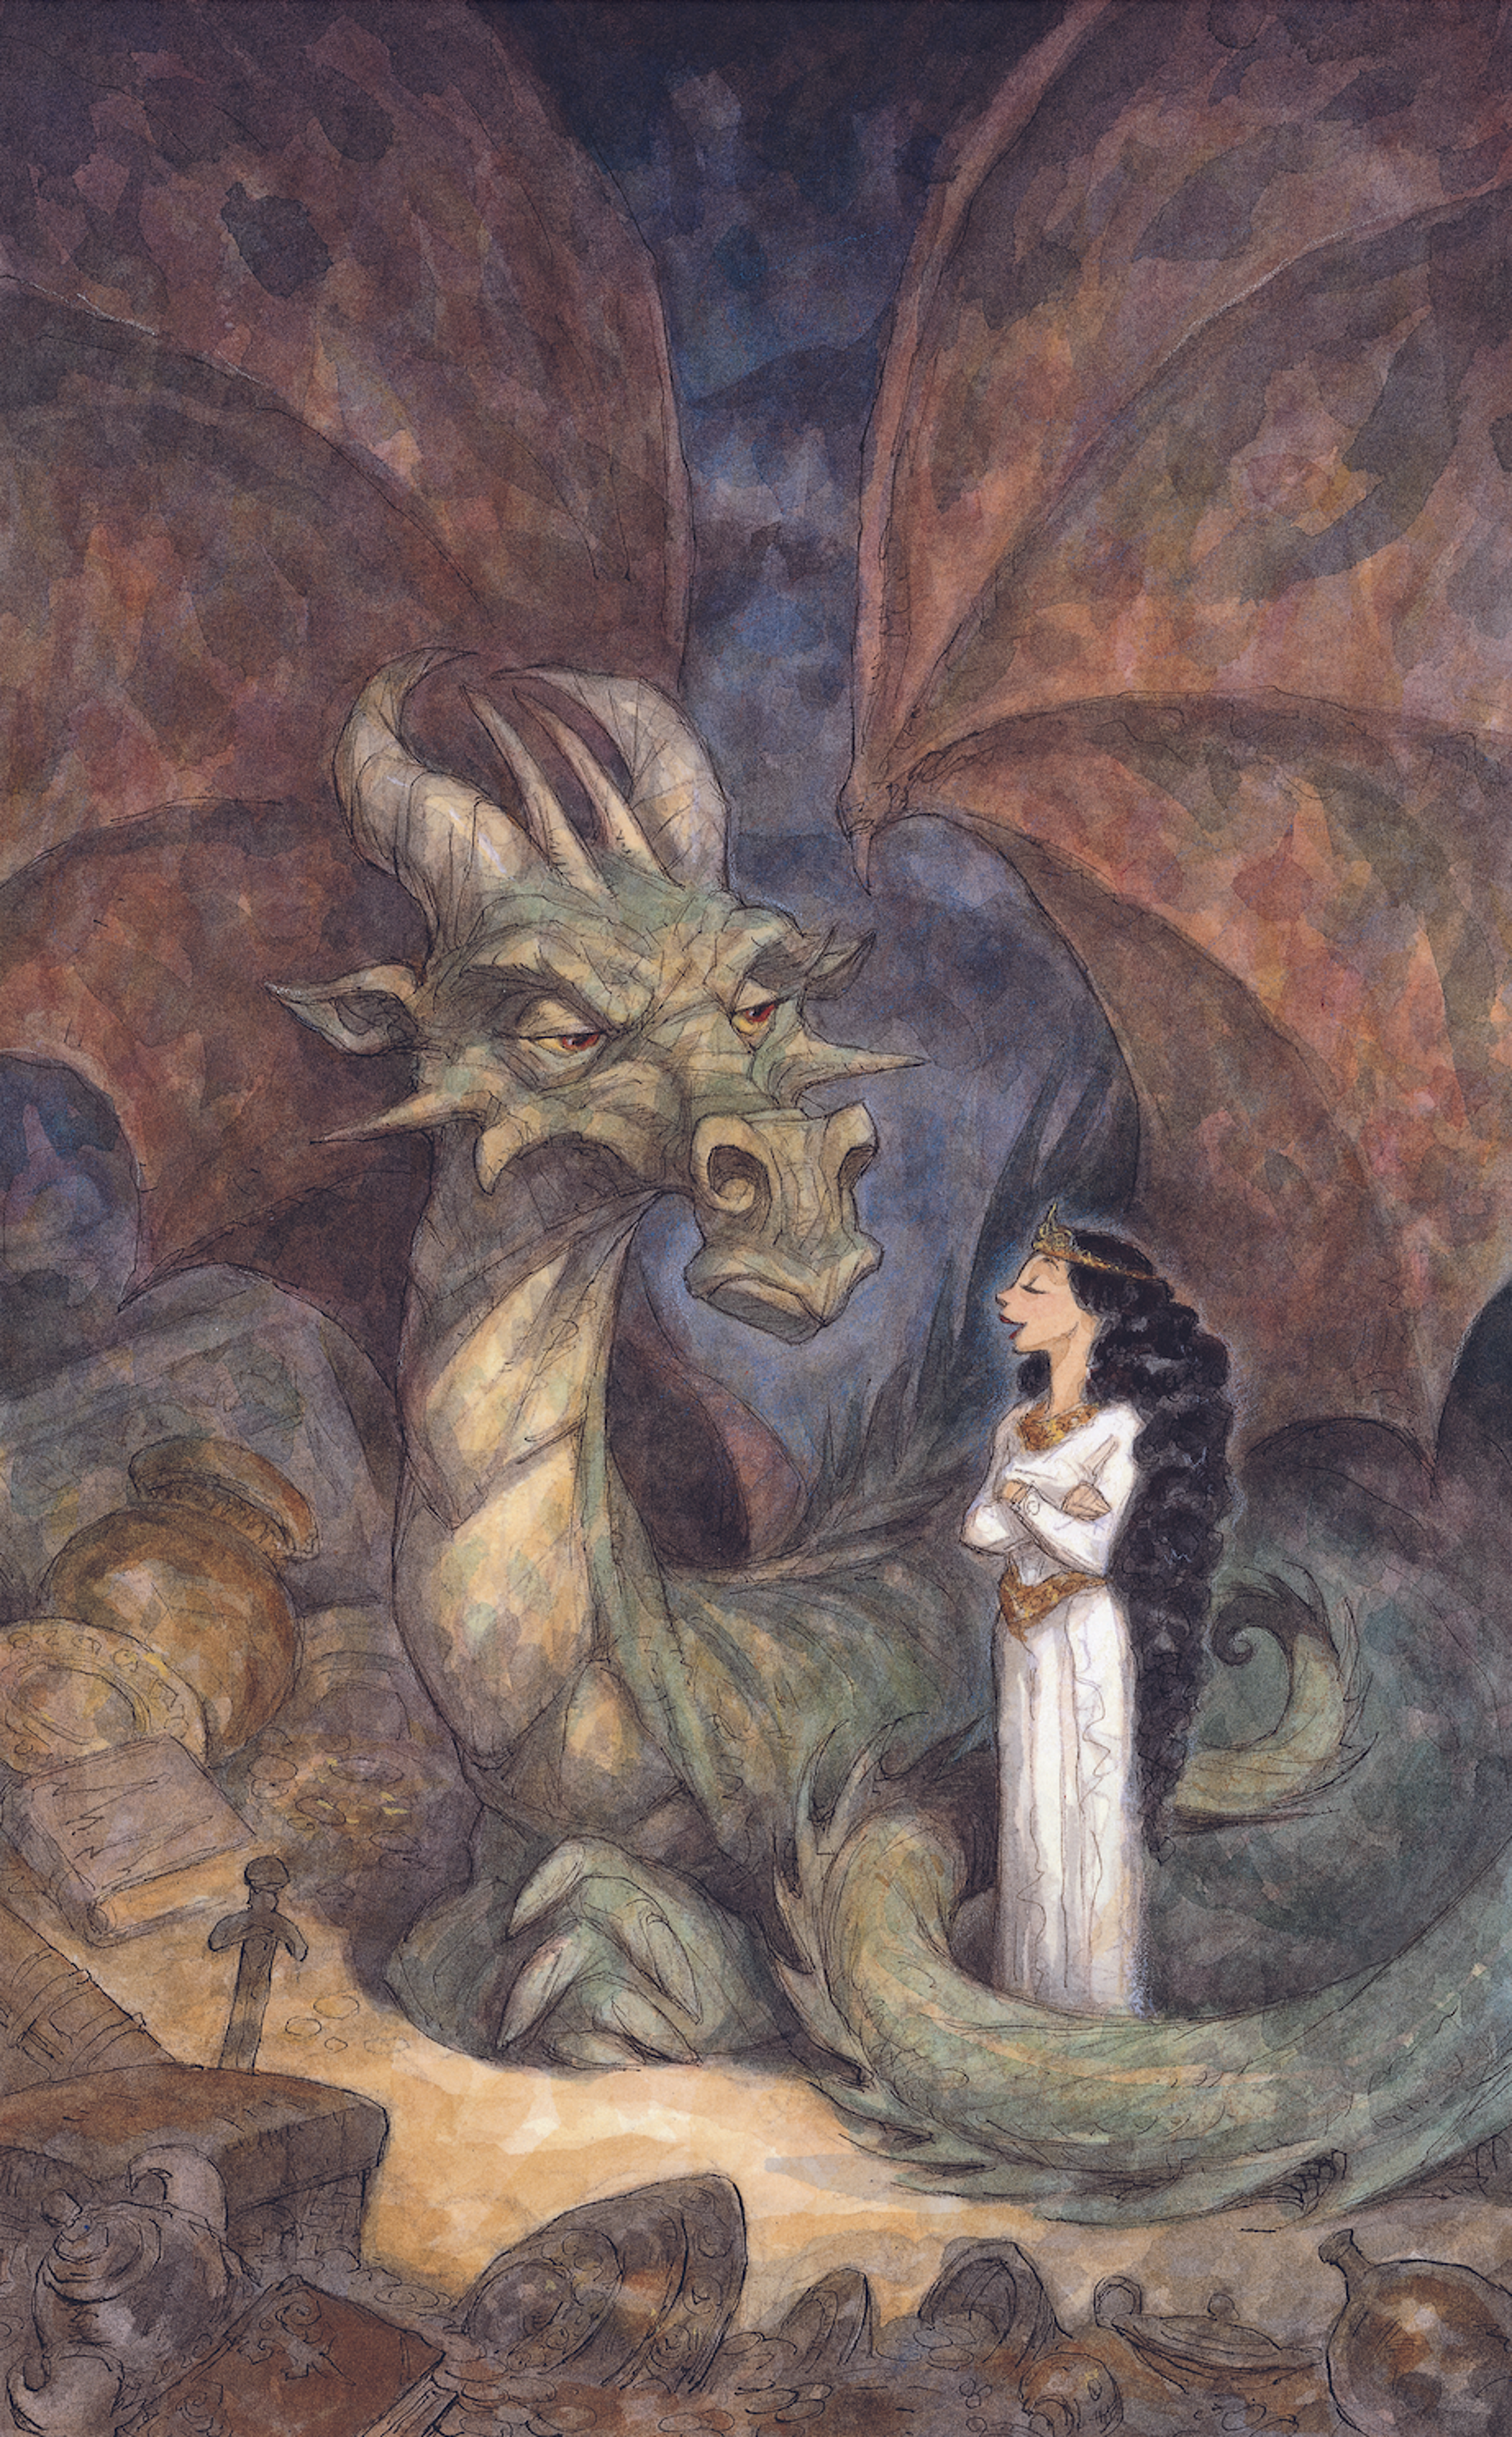 Book Cover "Dealing with Dragons" by Peter de Sève